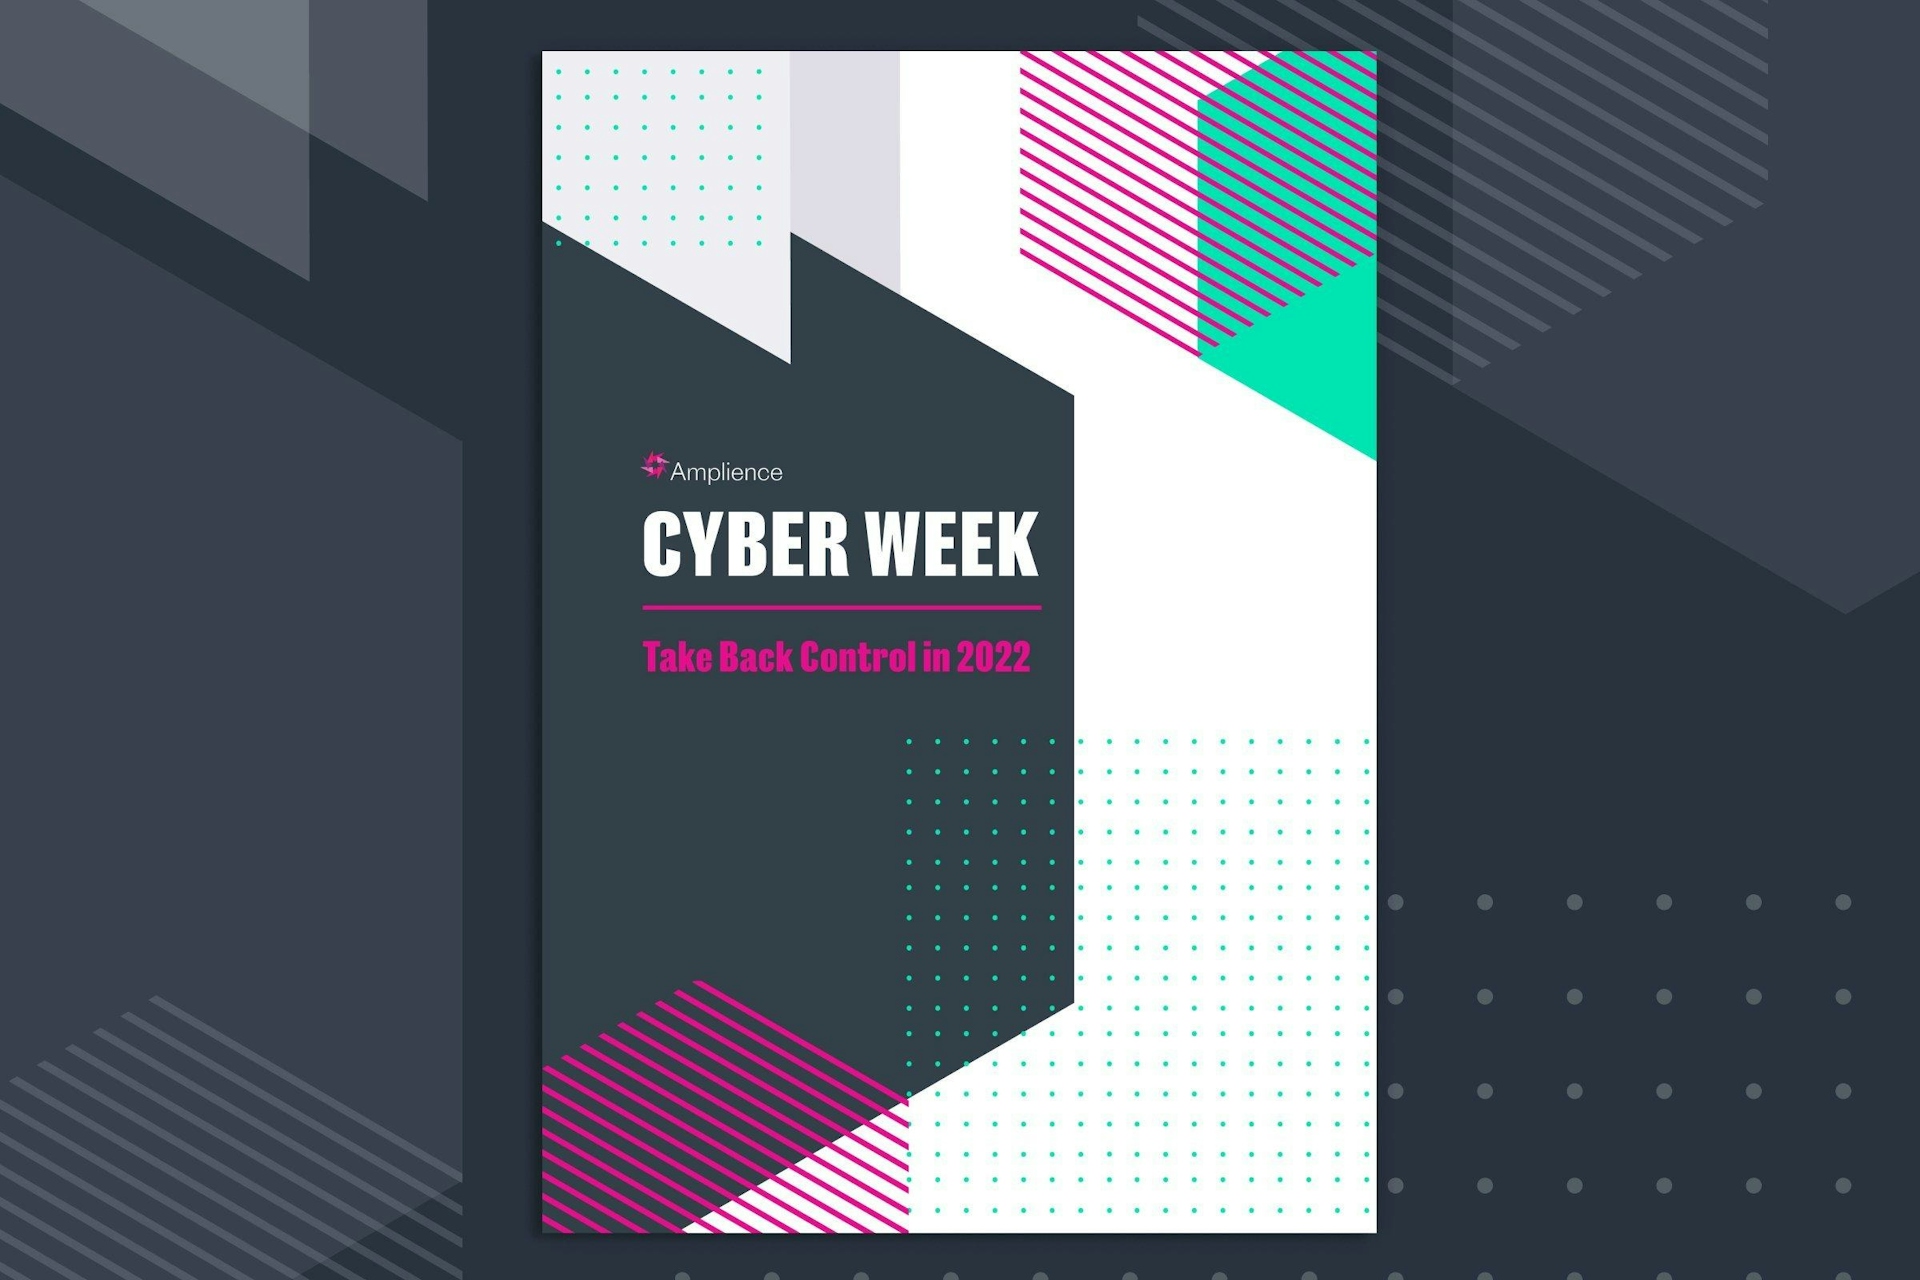 Taking back control during Cyber Week